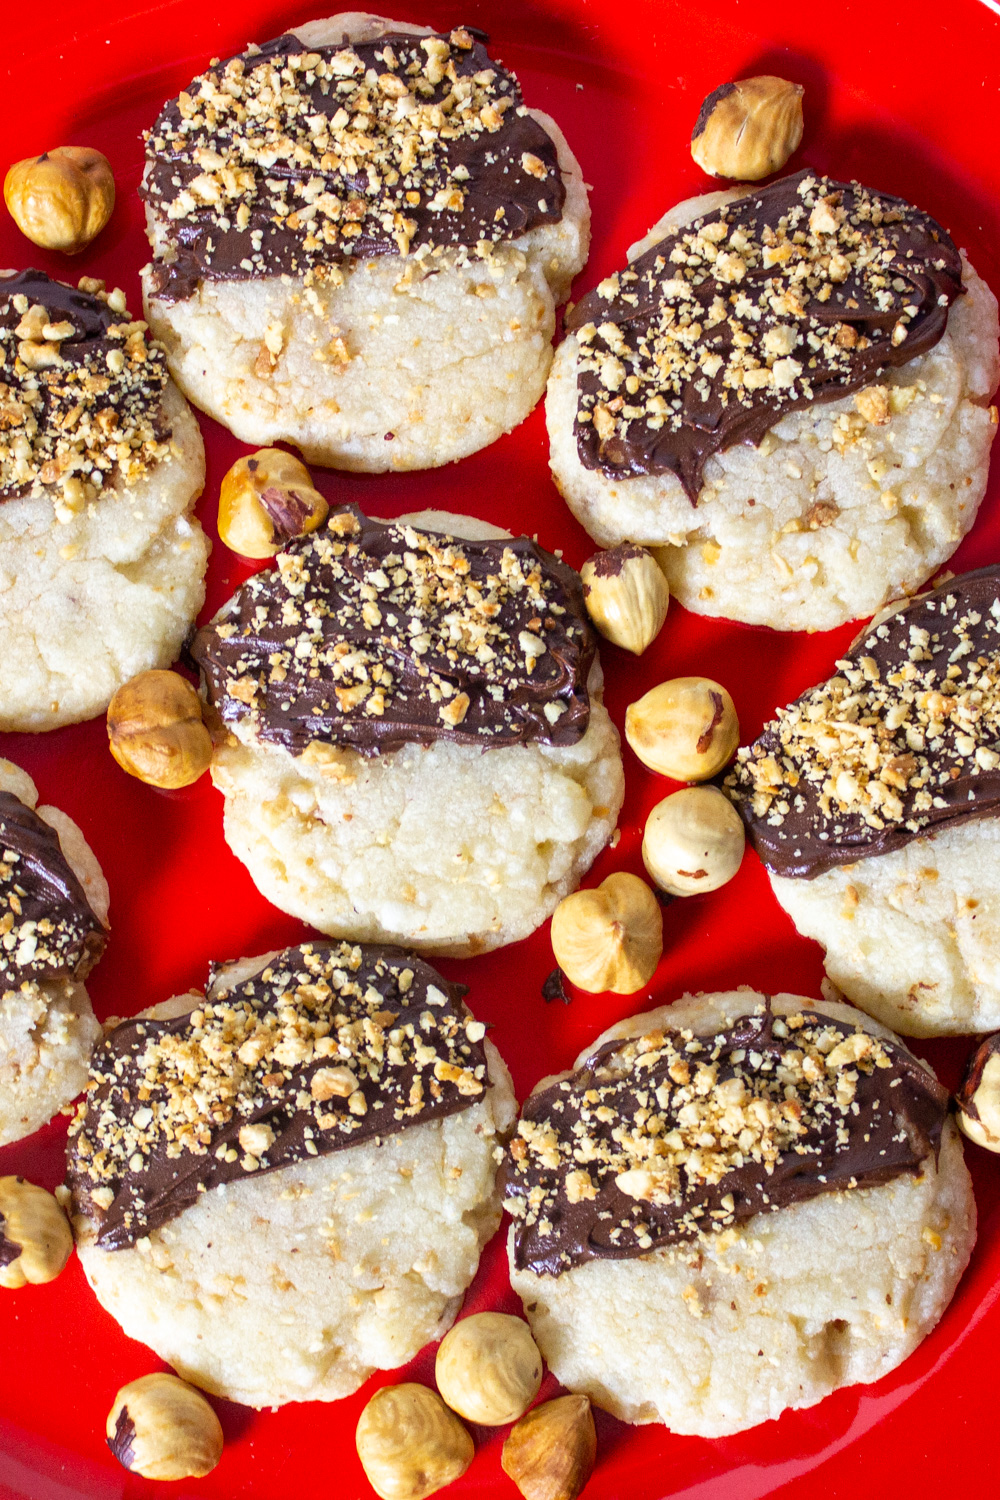 hazelnut cookies with chocolate and crushed hazelnuts on red plate.